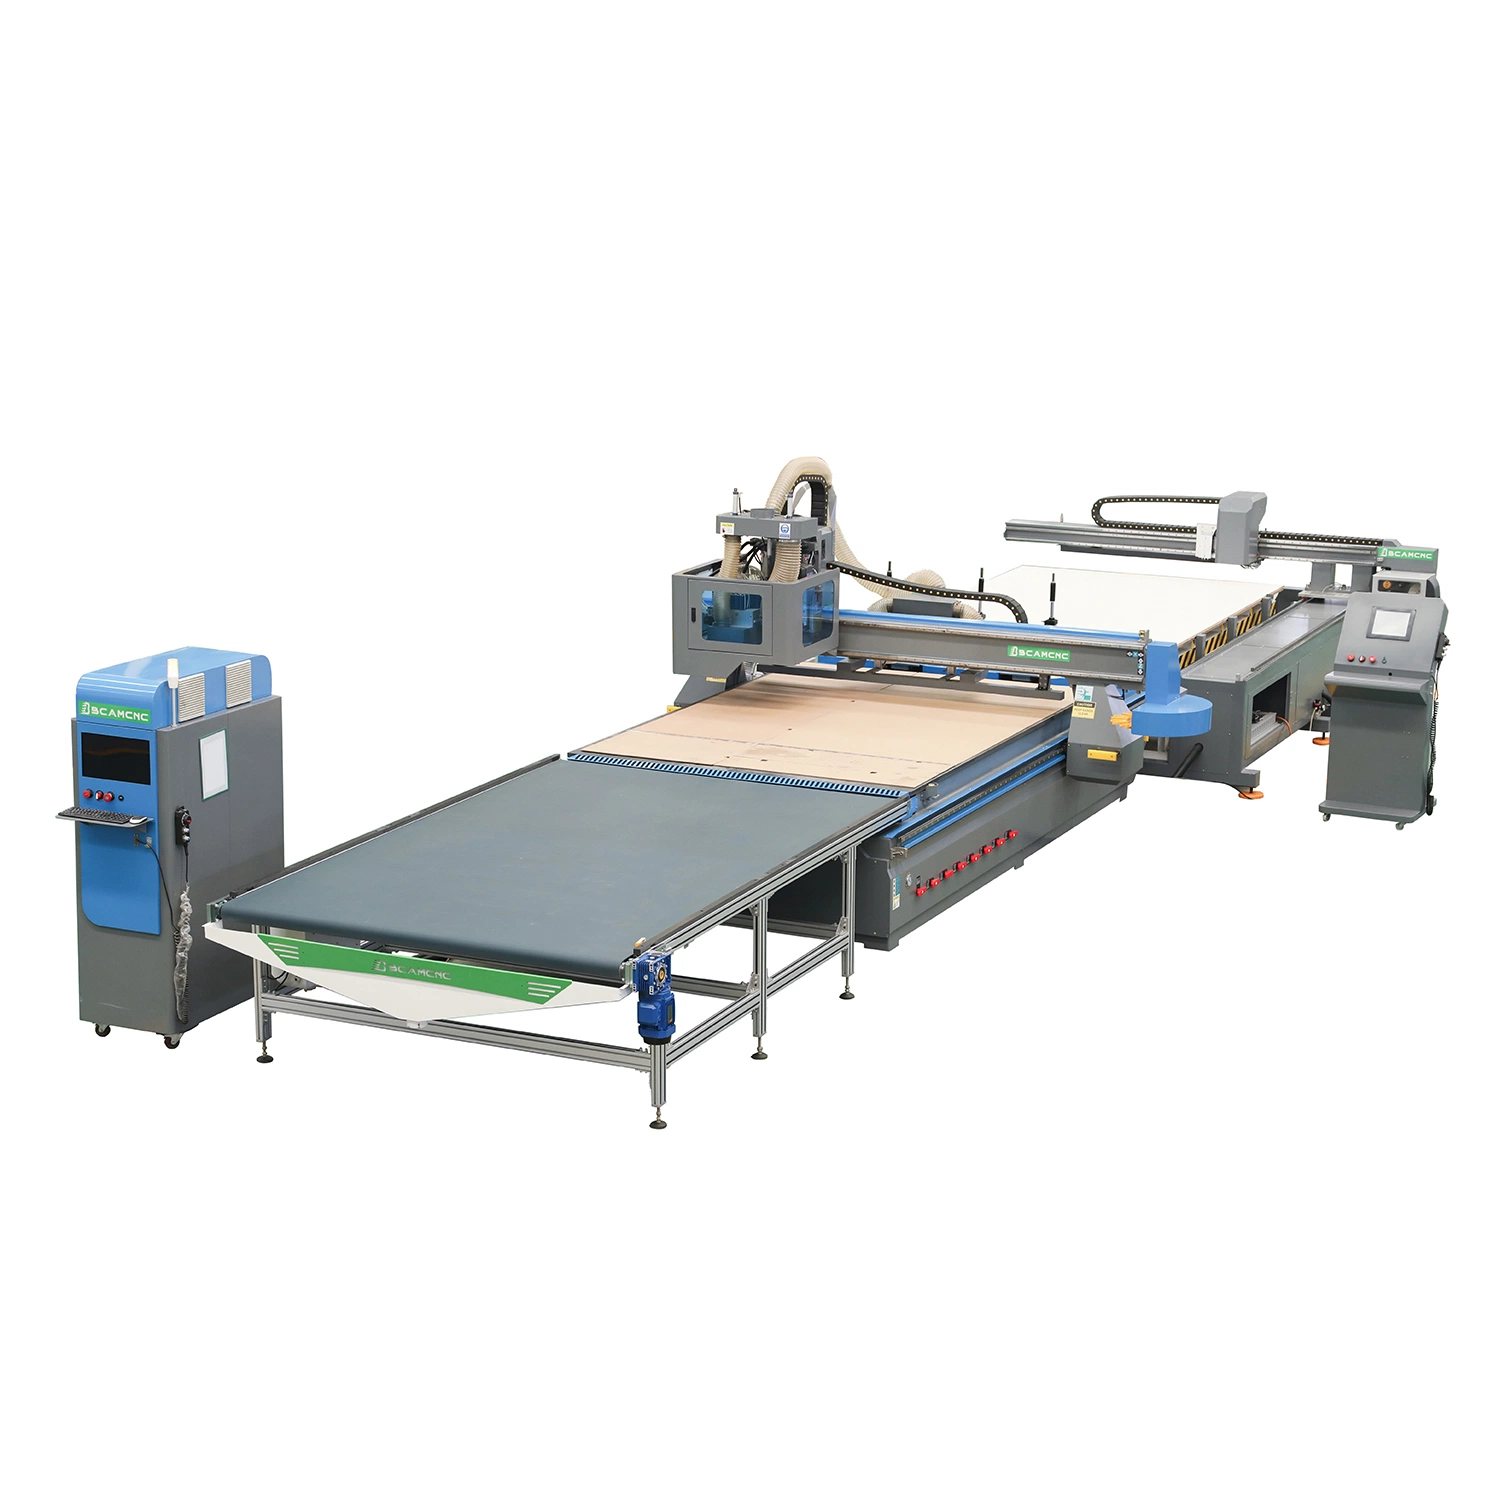 Furniture Industry CNC Router Machine Automatic Panel Loading and Unloding System CNC Engraving Router with Automatic Tool Changer